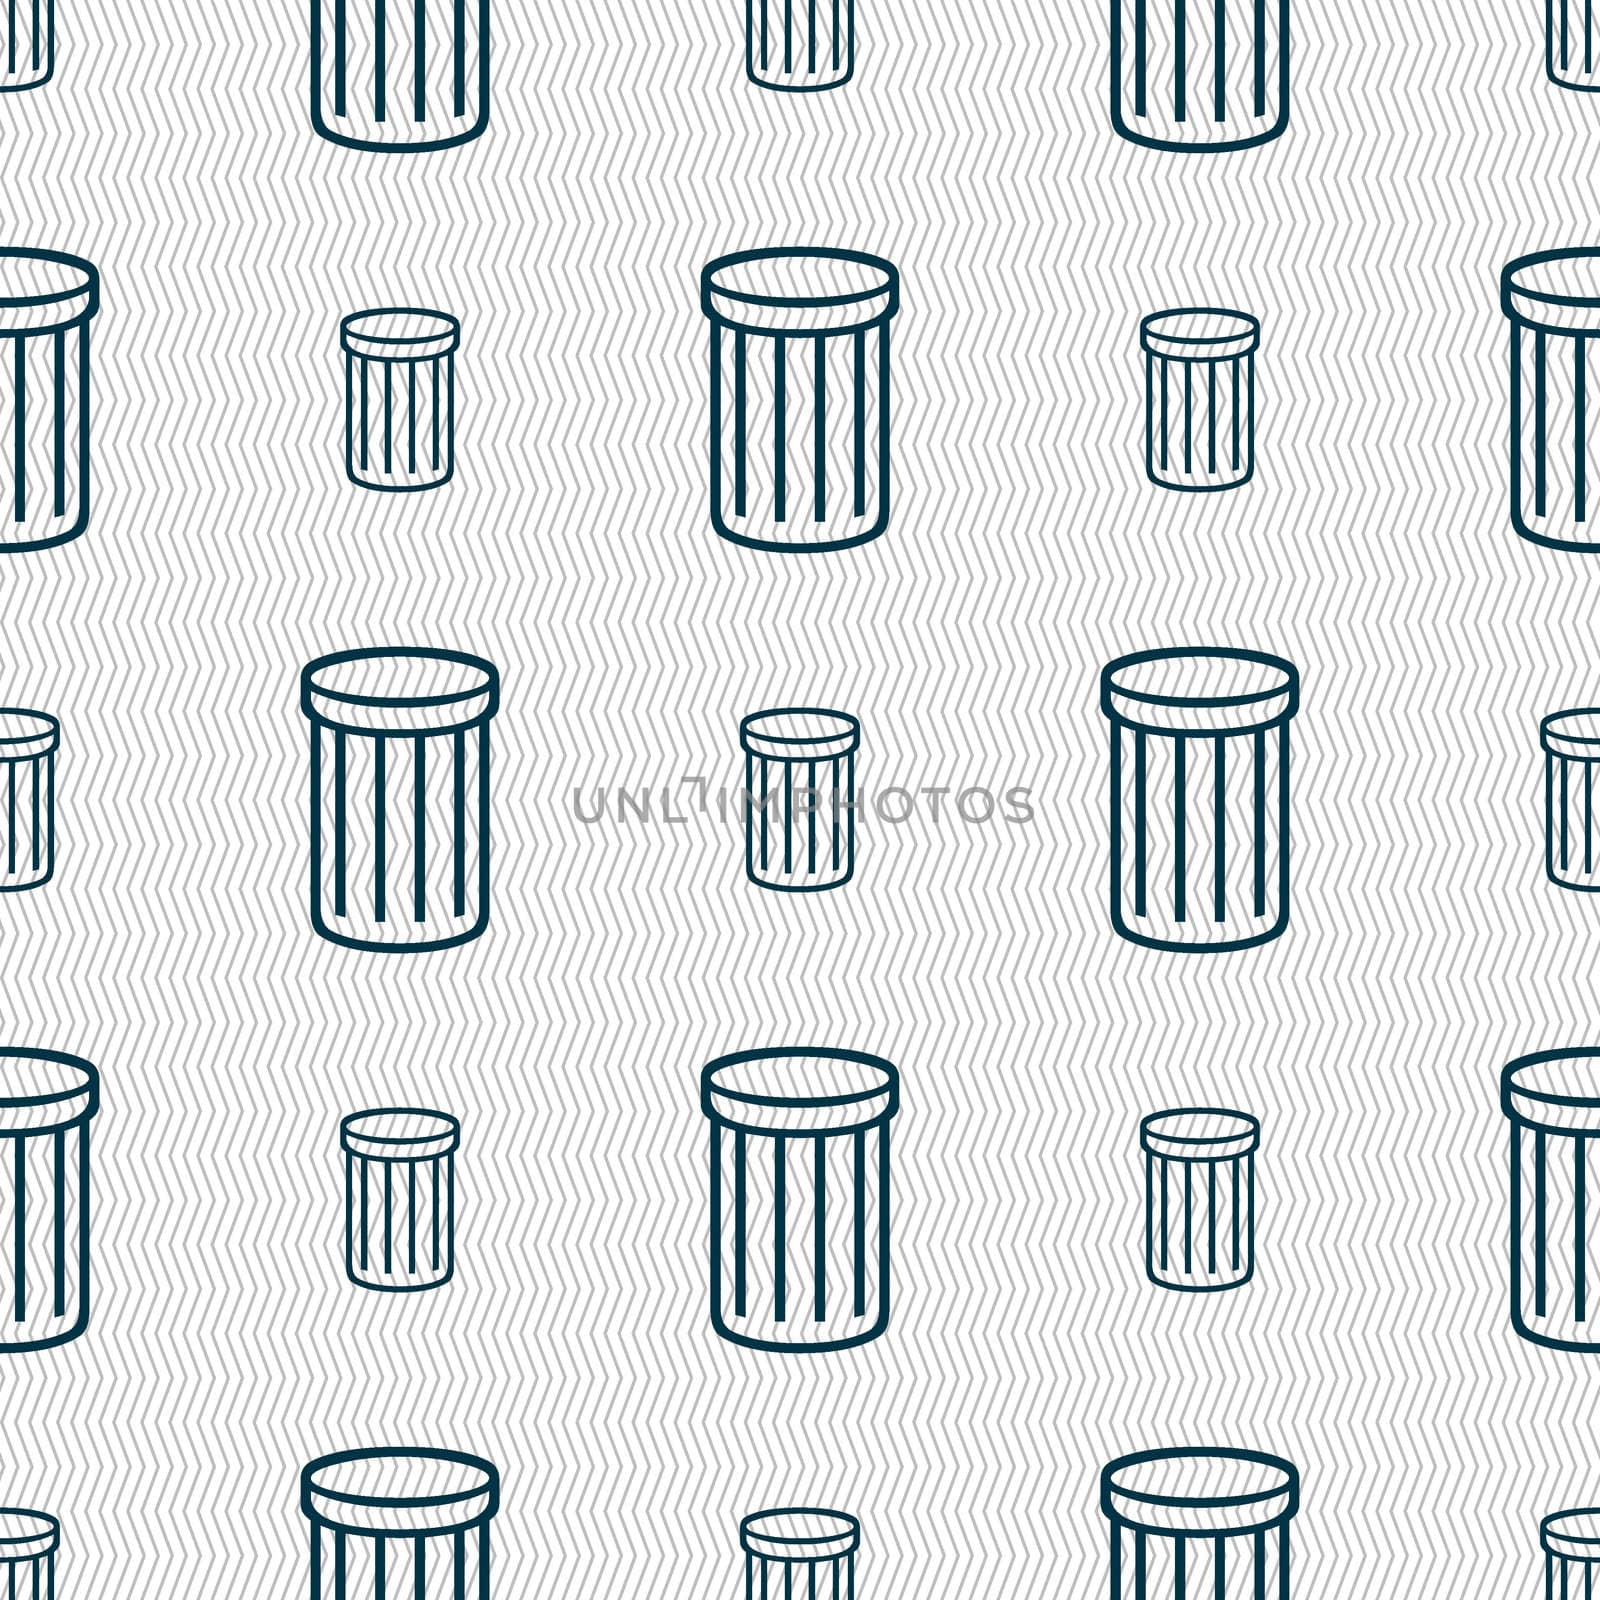 Recycle bin sign icon. Symbol. Seamless abstract background with geometric shapes. illustration